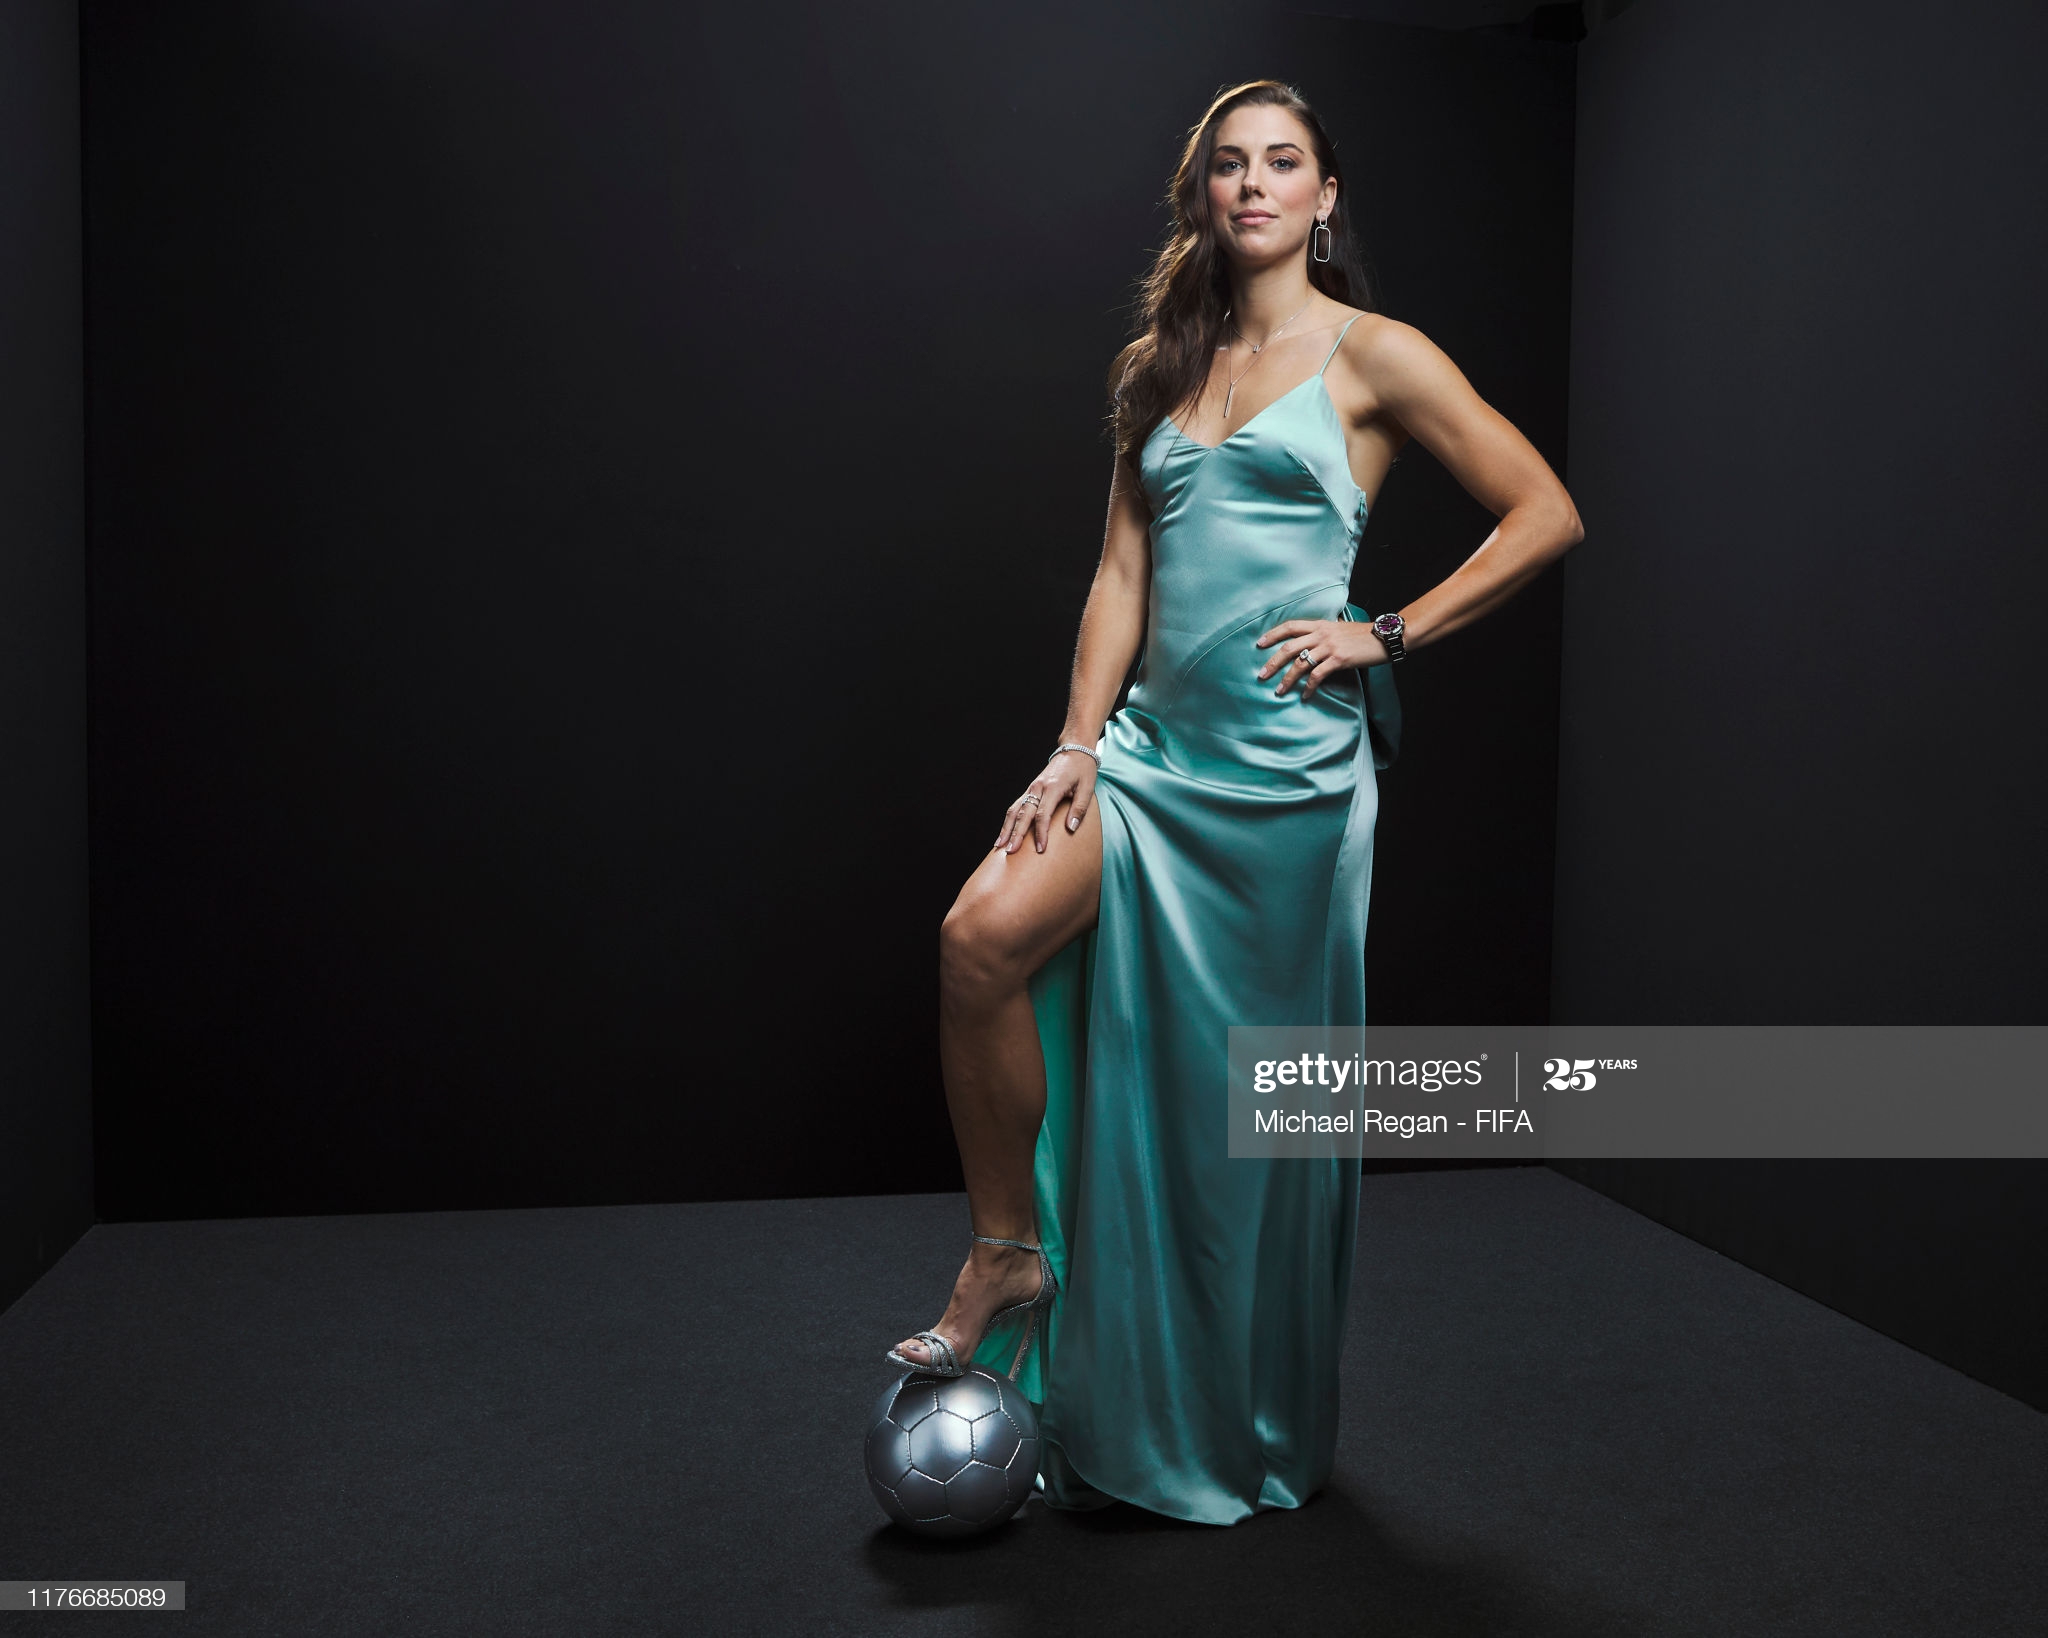 gettyimages-1176685089-2048x2048.jpg